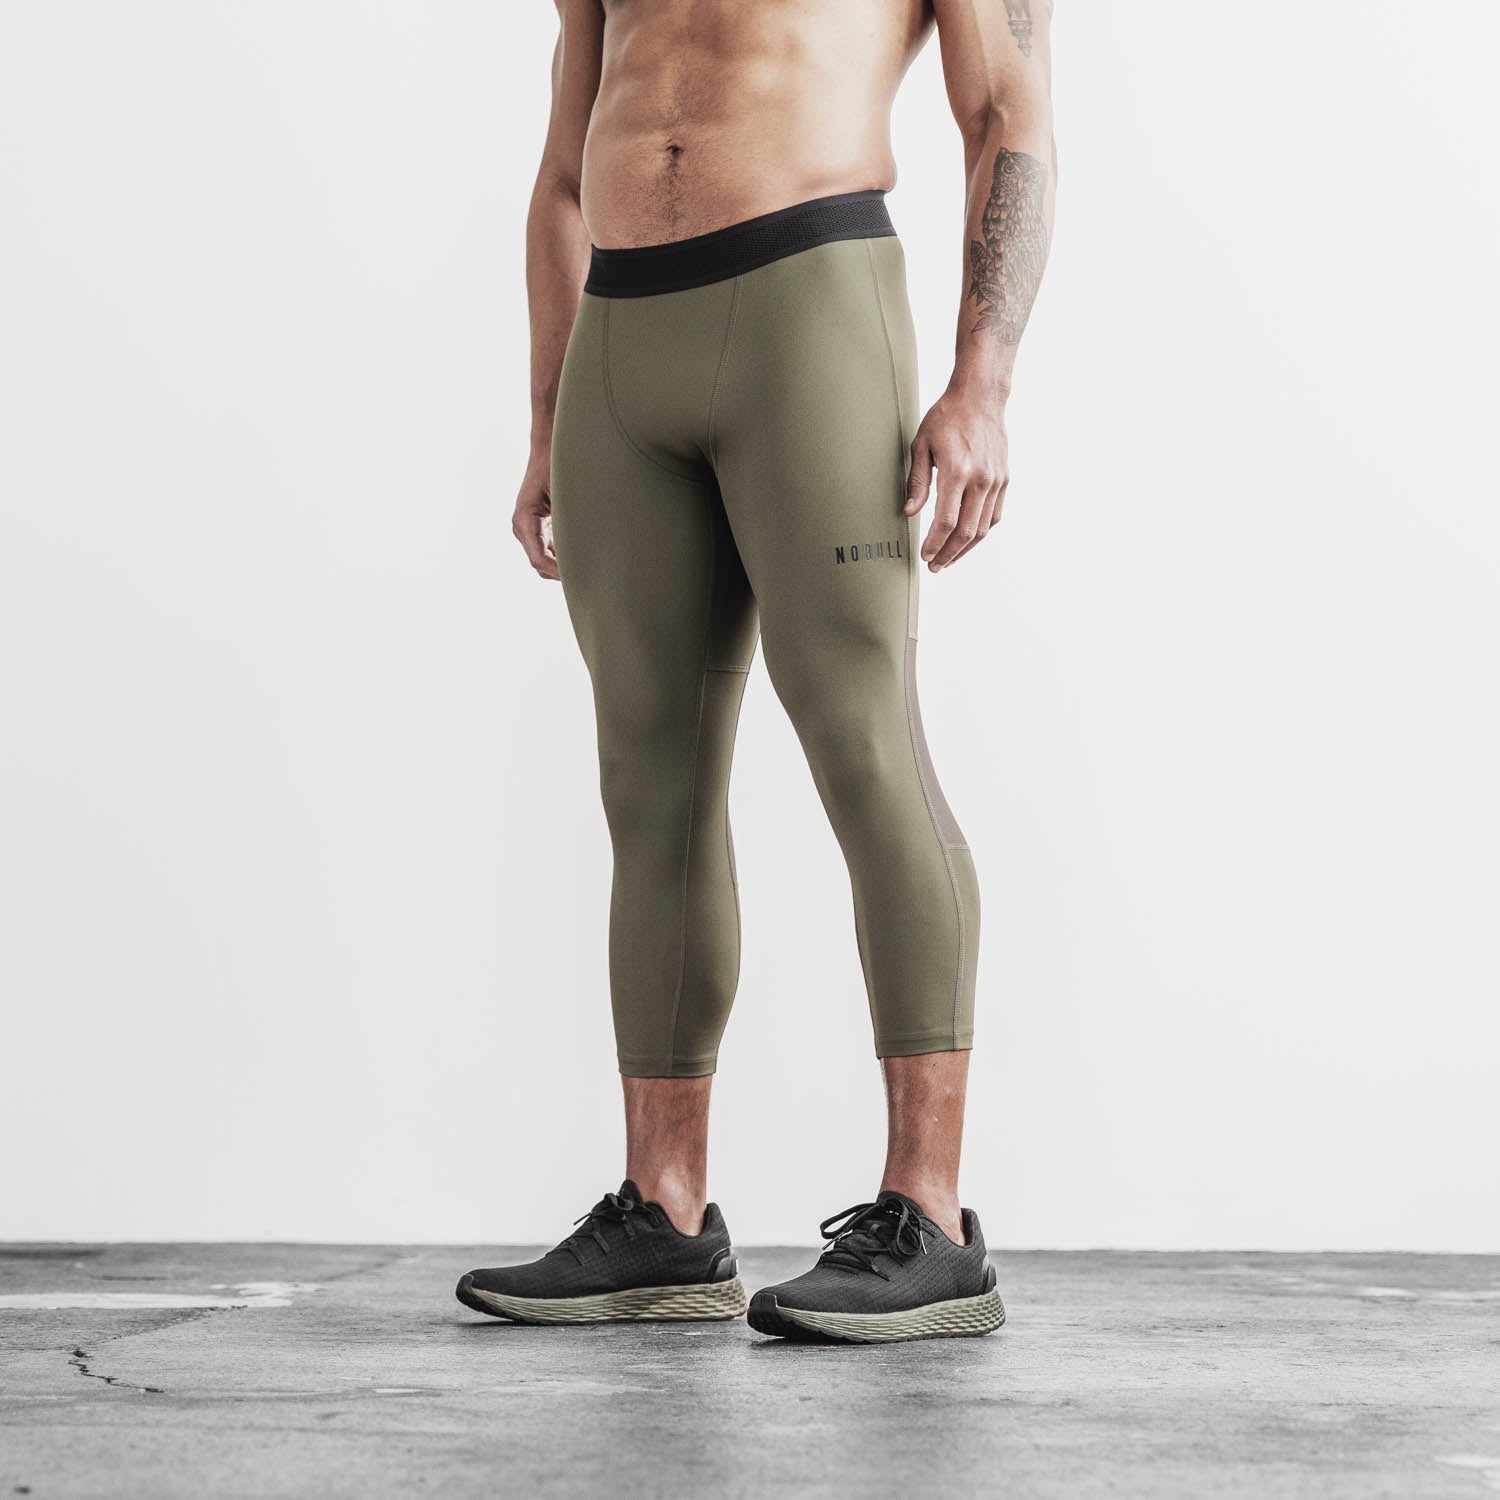 Arctic White Camouflage Compression Lycra Tights for Man